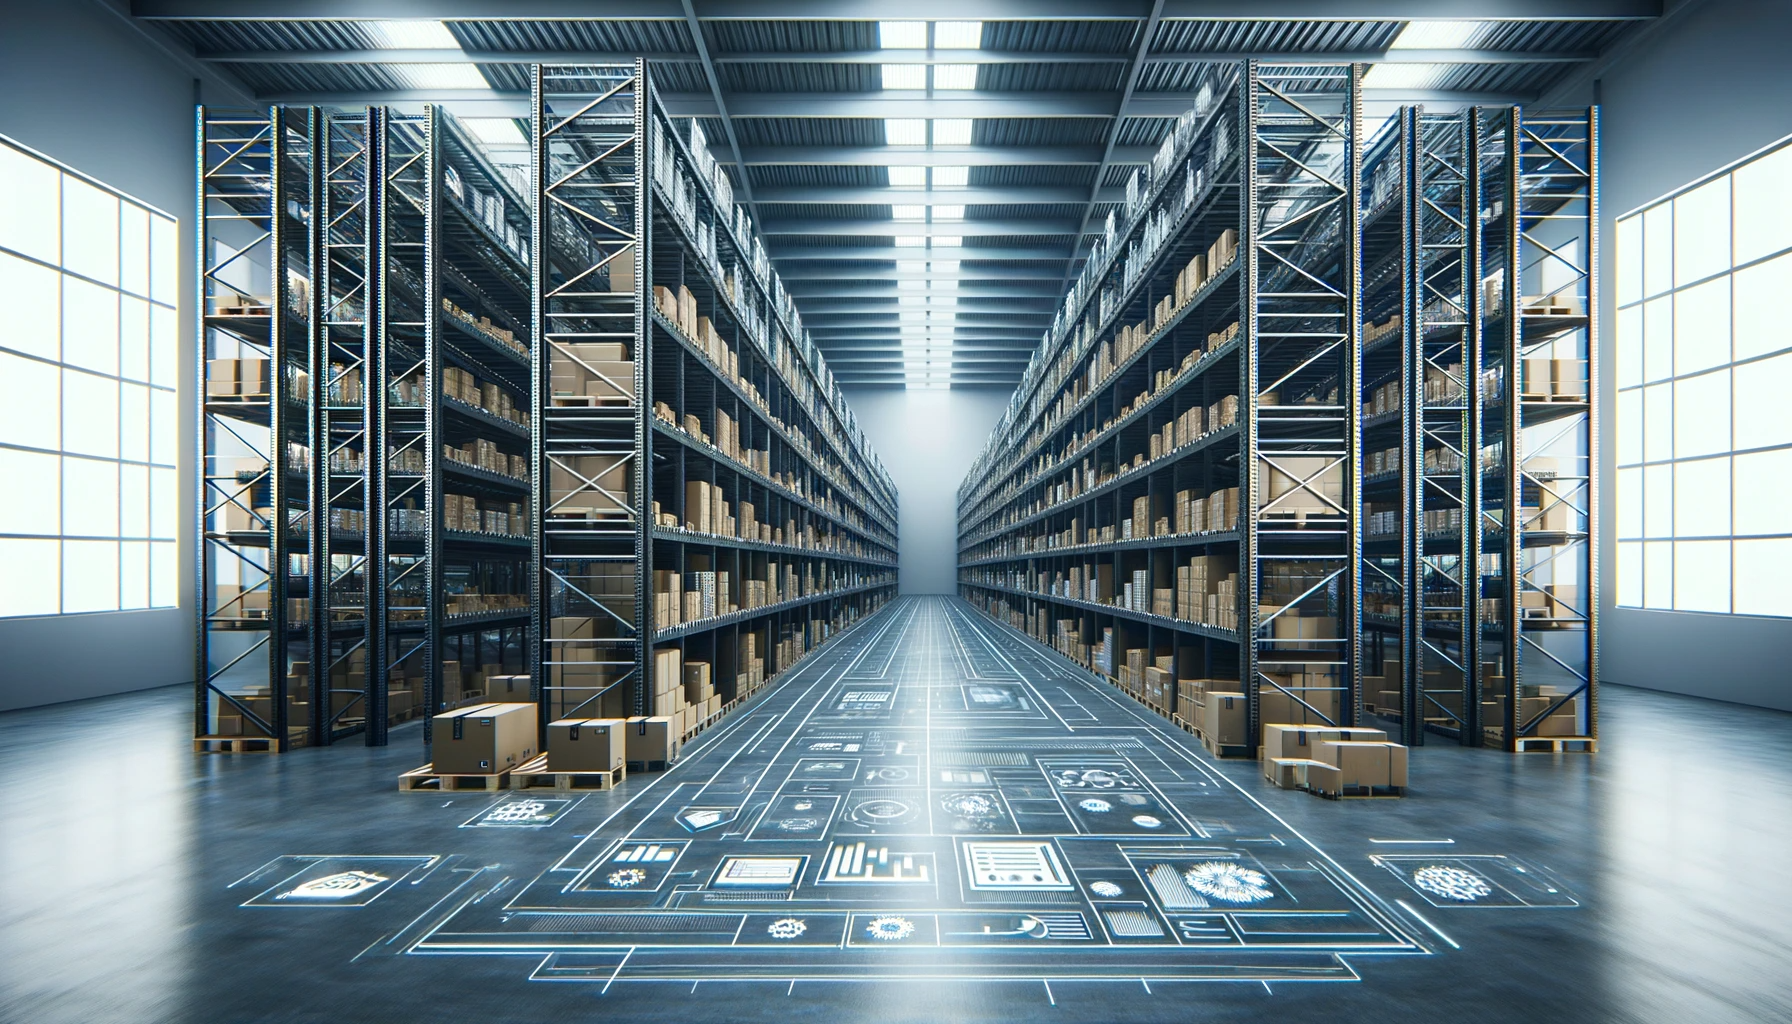 sap business one bin locations - A modern, well-organized warehouse interior showing rows of shelves neatly arranged and filled with various goods. The warehouse should look spacious